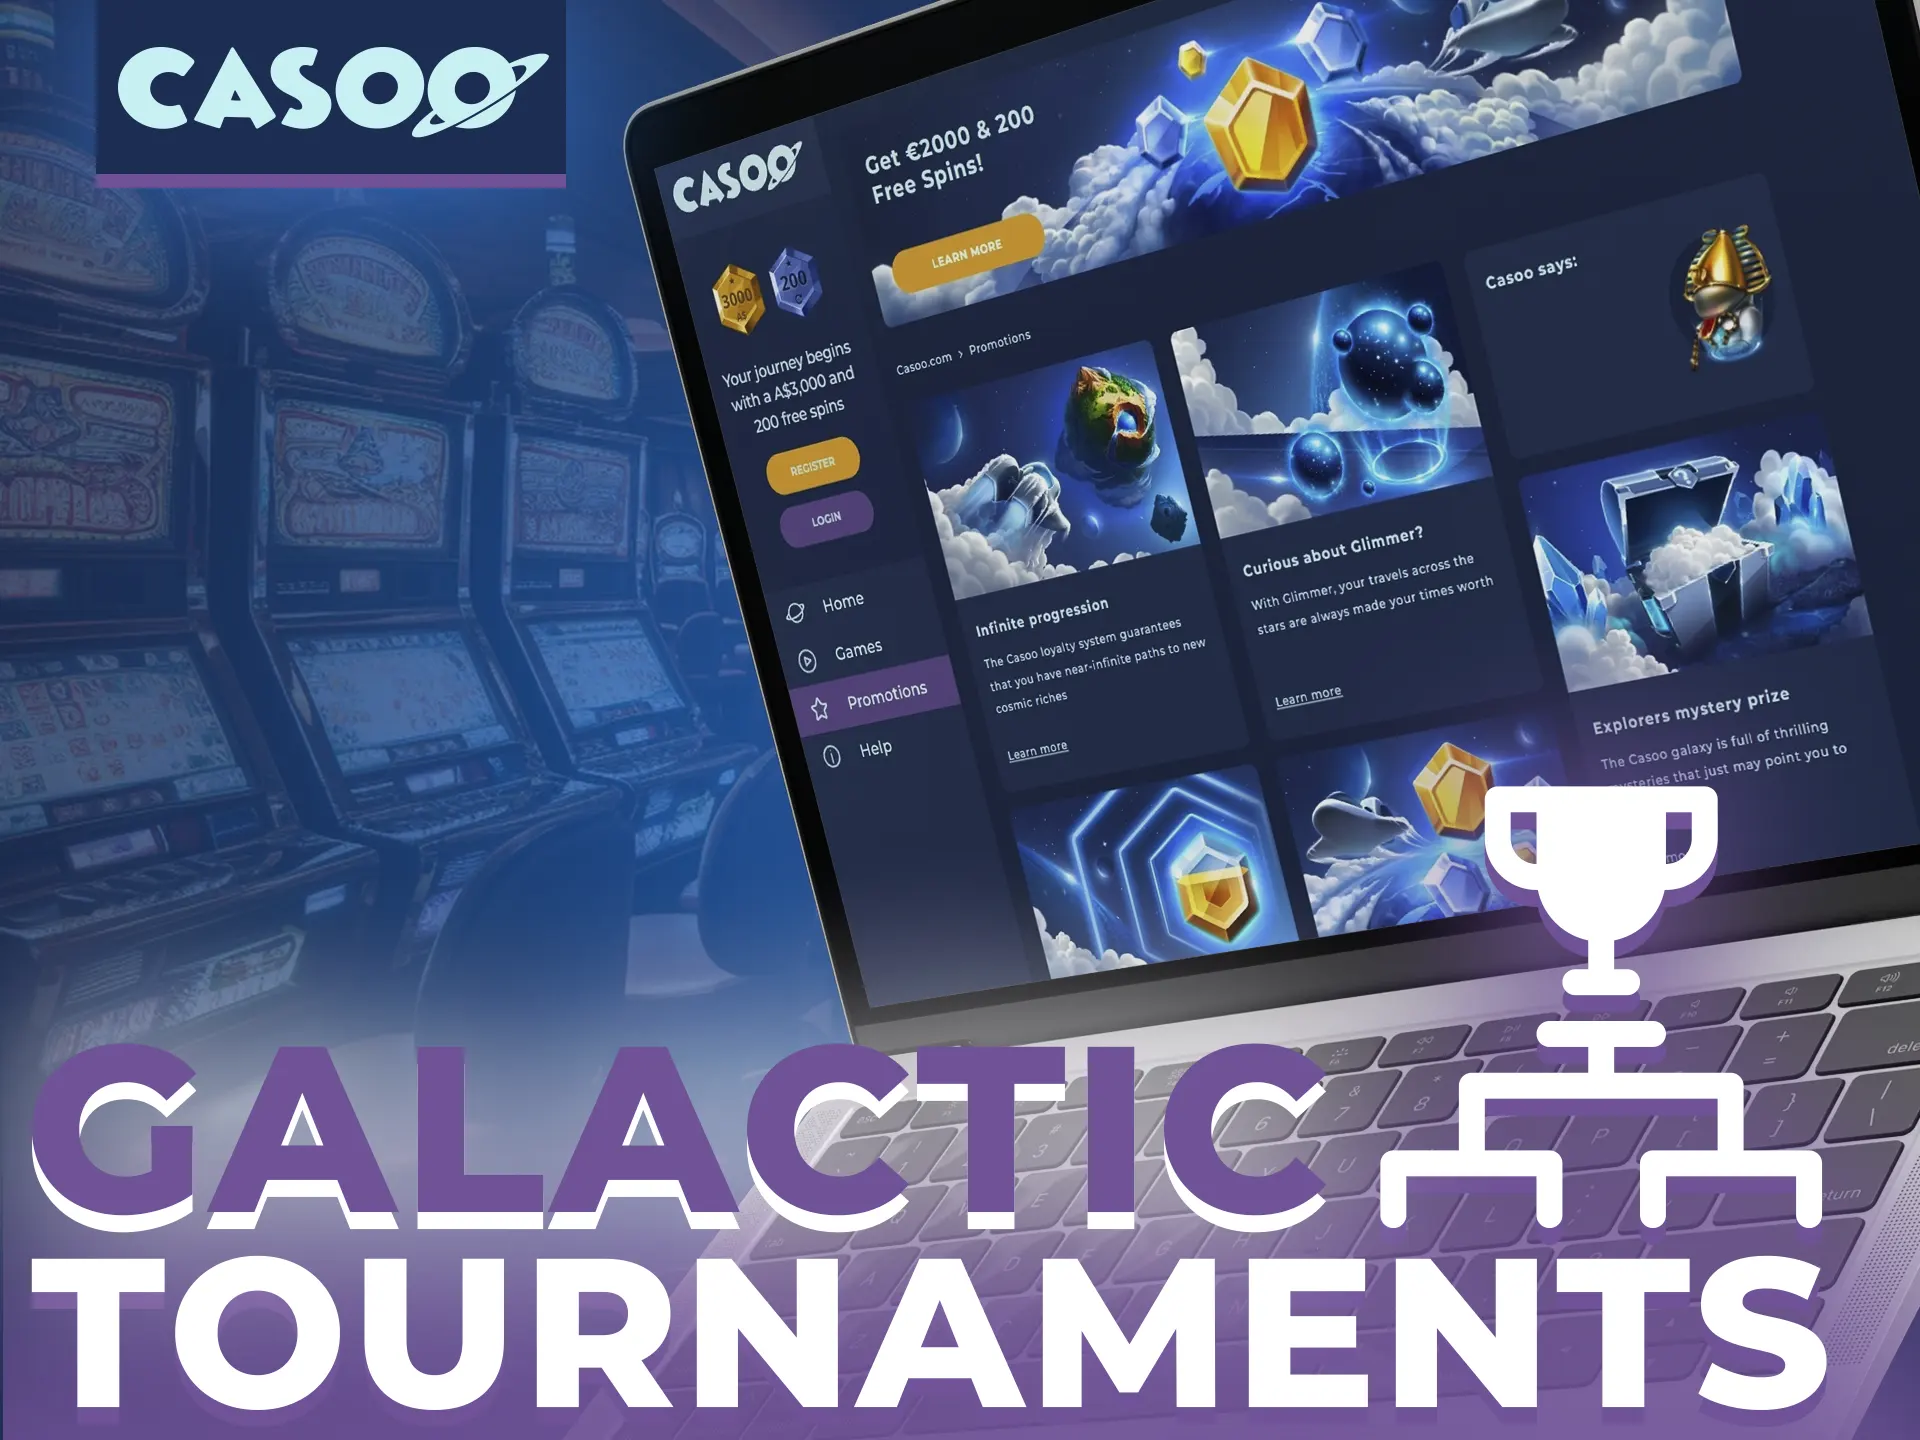 Compete for cash and free spins in Galactic Tournaments at Casoo!